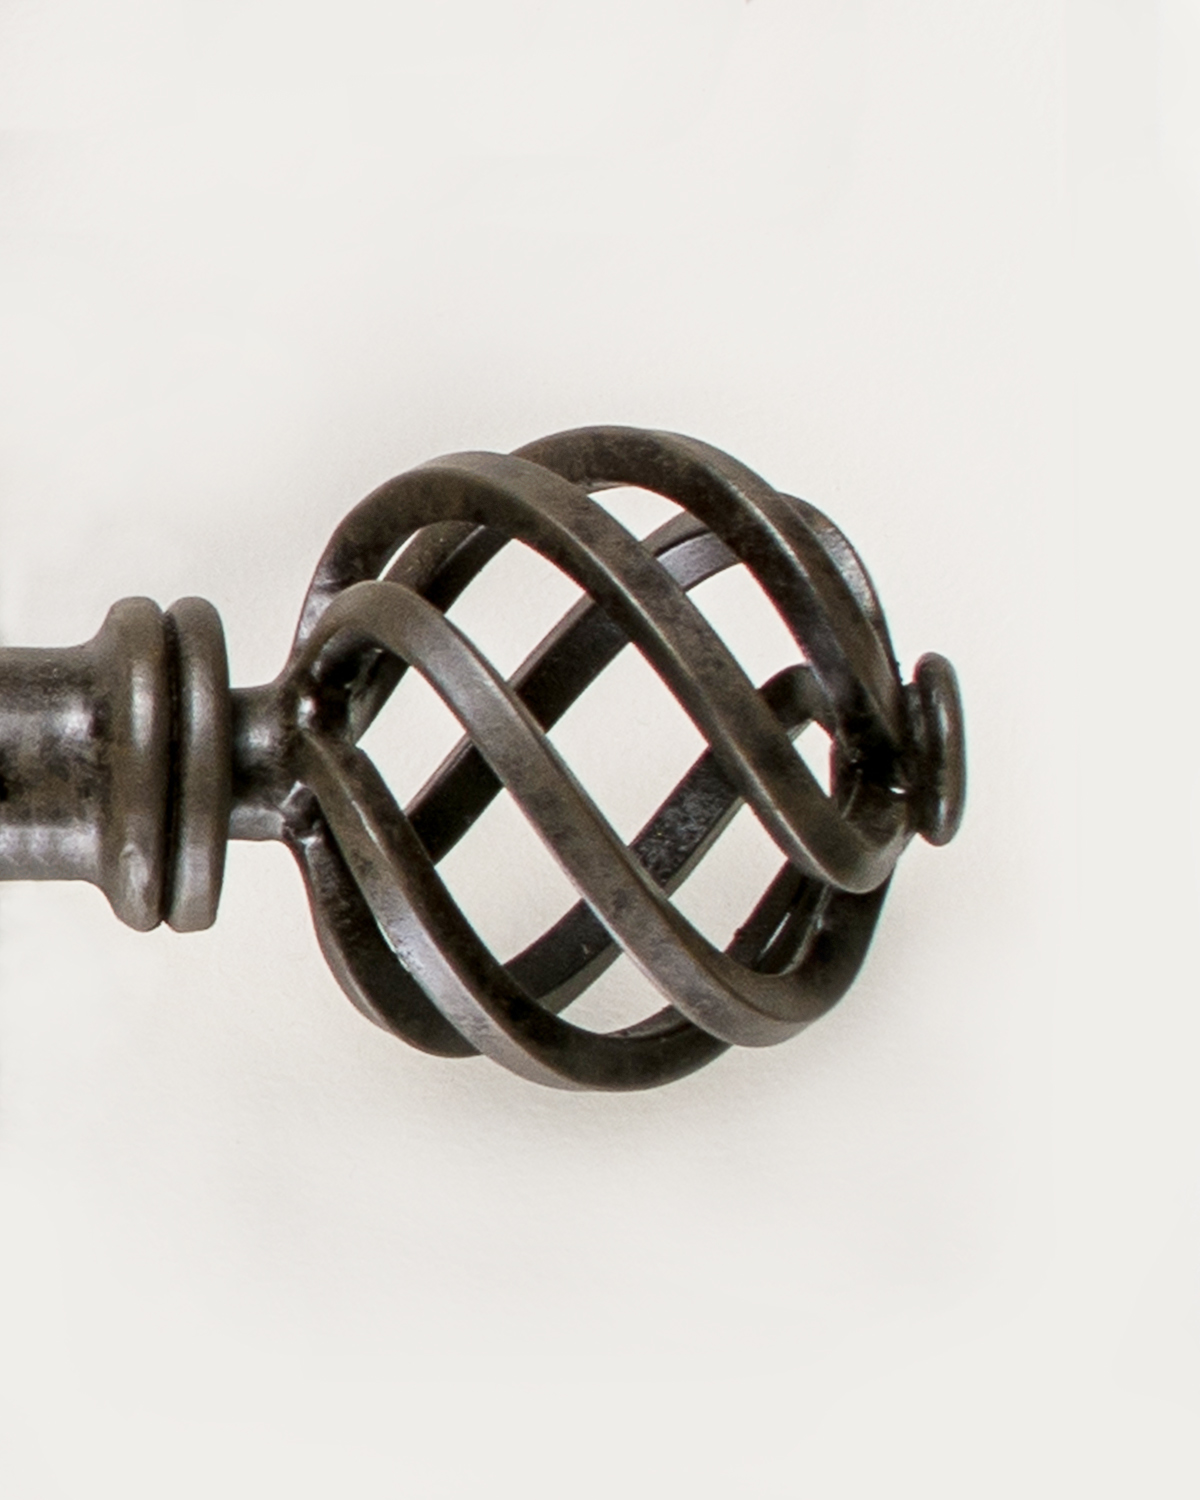 ball twist finial for curtain rods